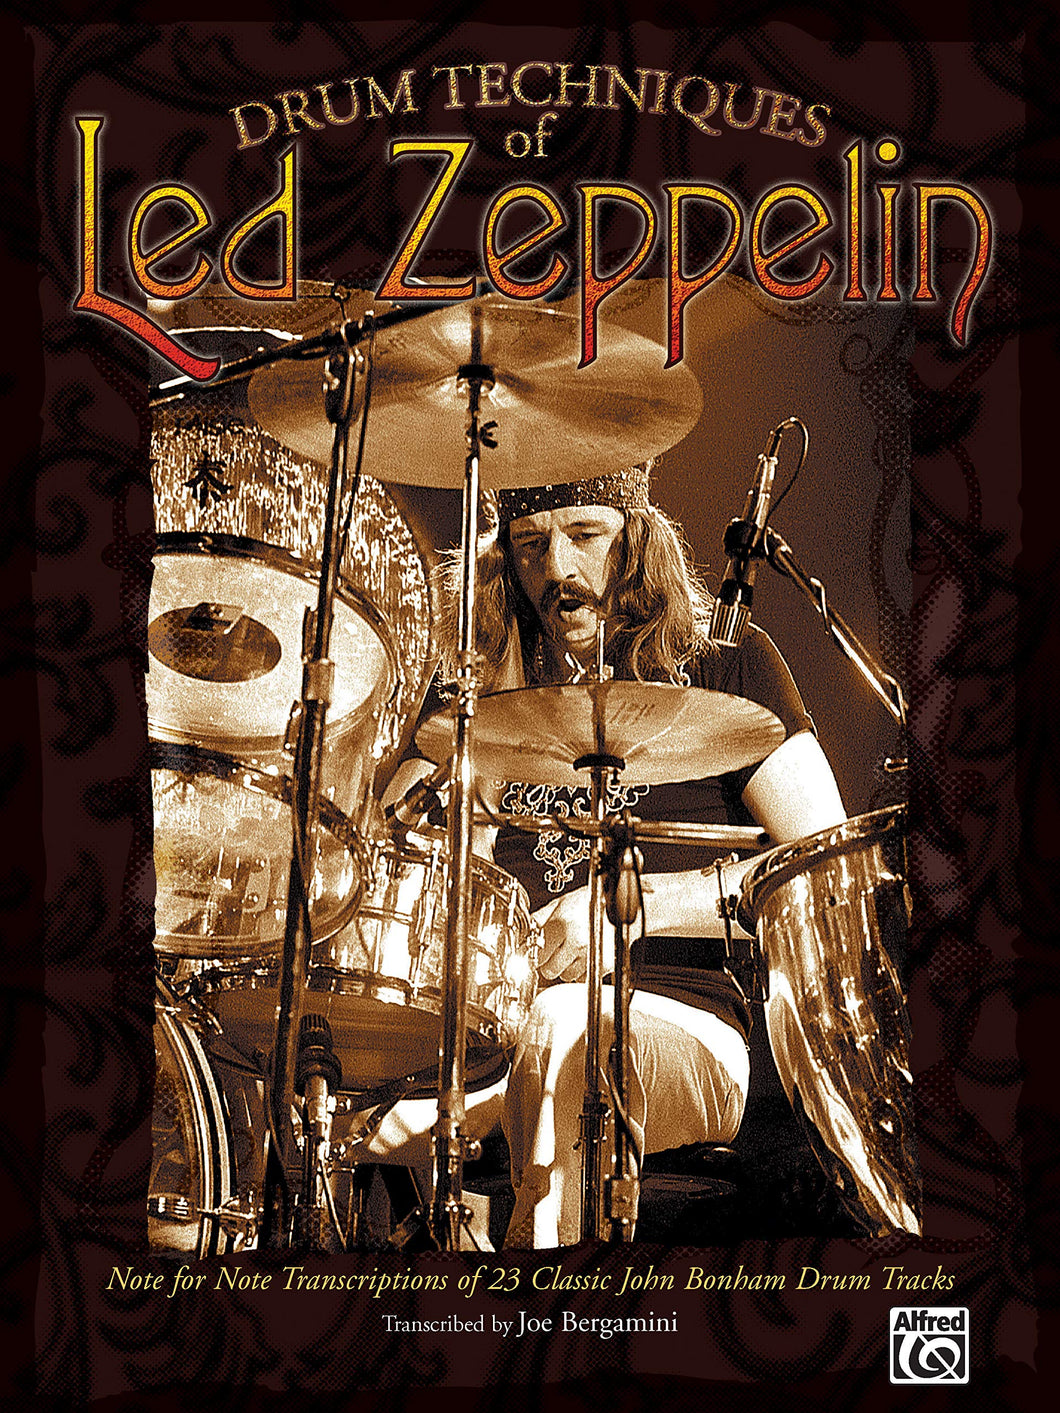 The Song Remains the Same - Led Zeppelin - Collection of Drum Transcriptions / Drum Sheet Music - Alfred Music DTLZNFNT